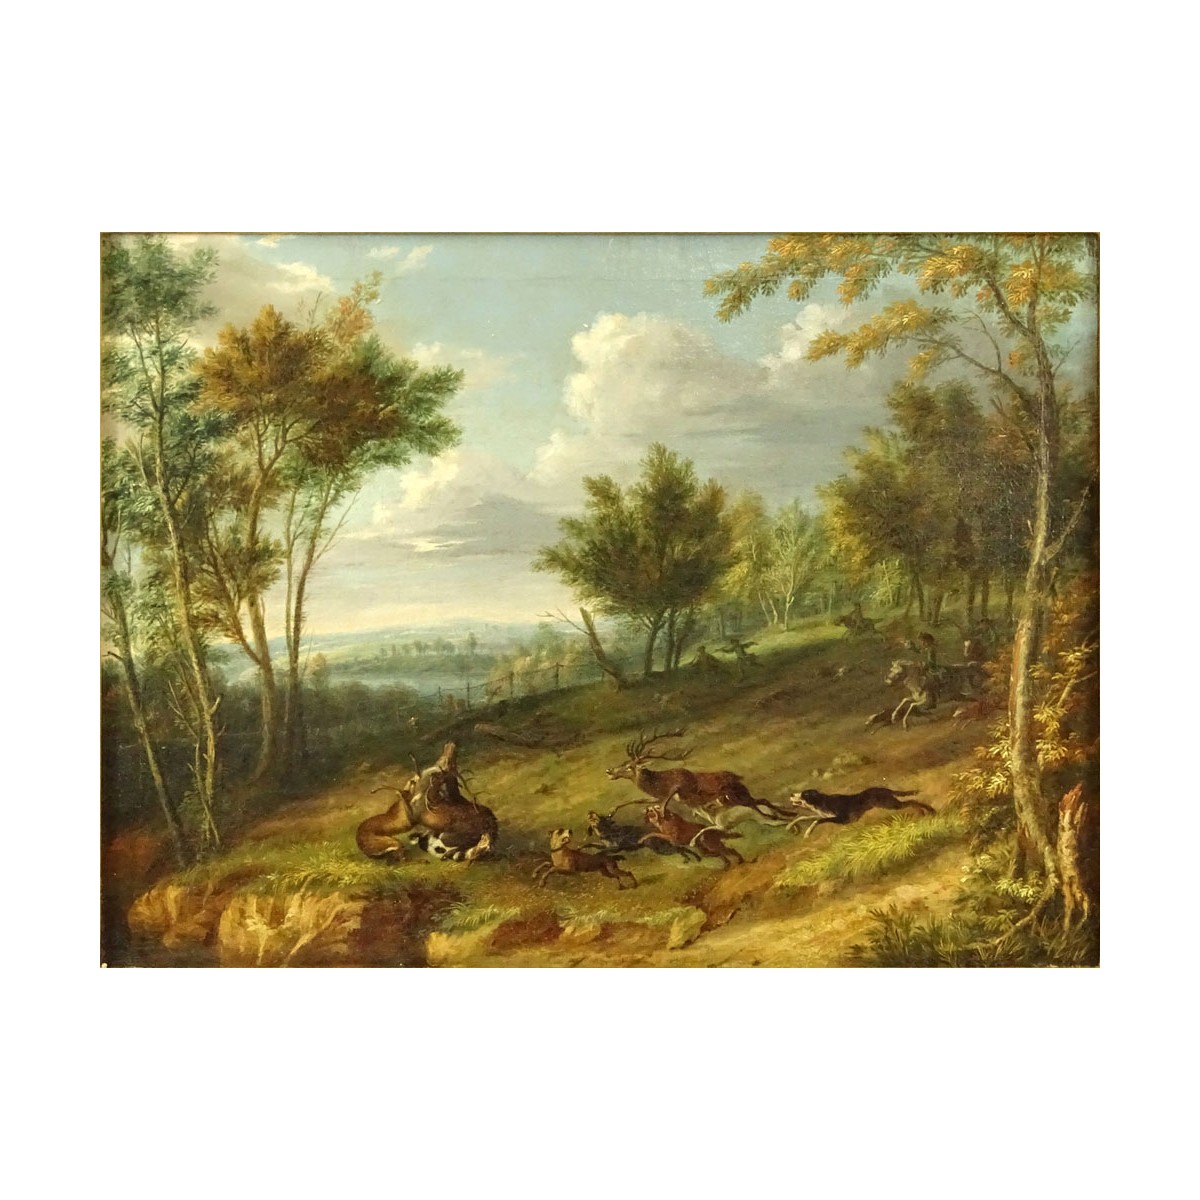 Friedrich Wilhelm Hirt, German (1721-1772) Oil on Canvas, Stag Hunt. Unsigned. Very good conserved 